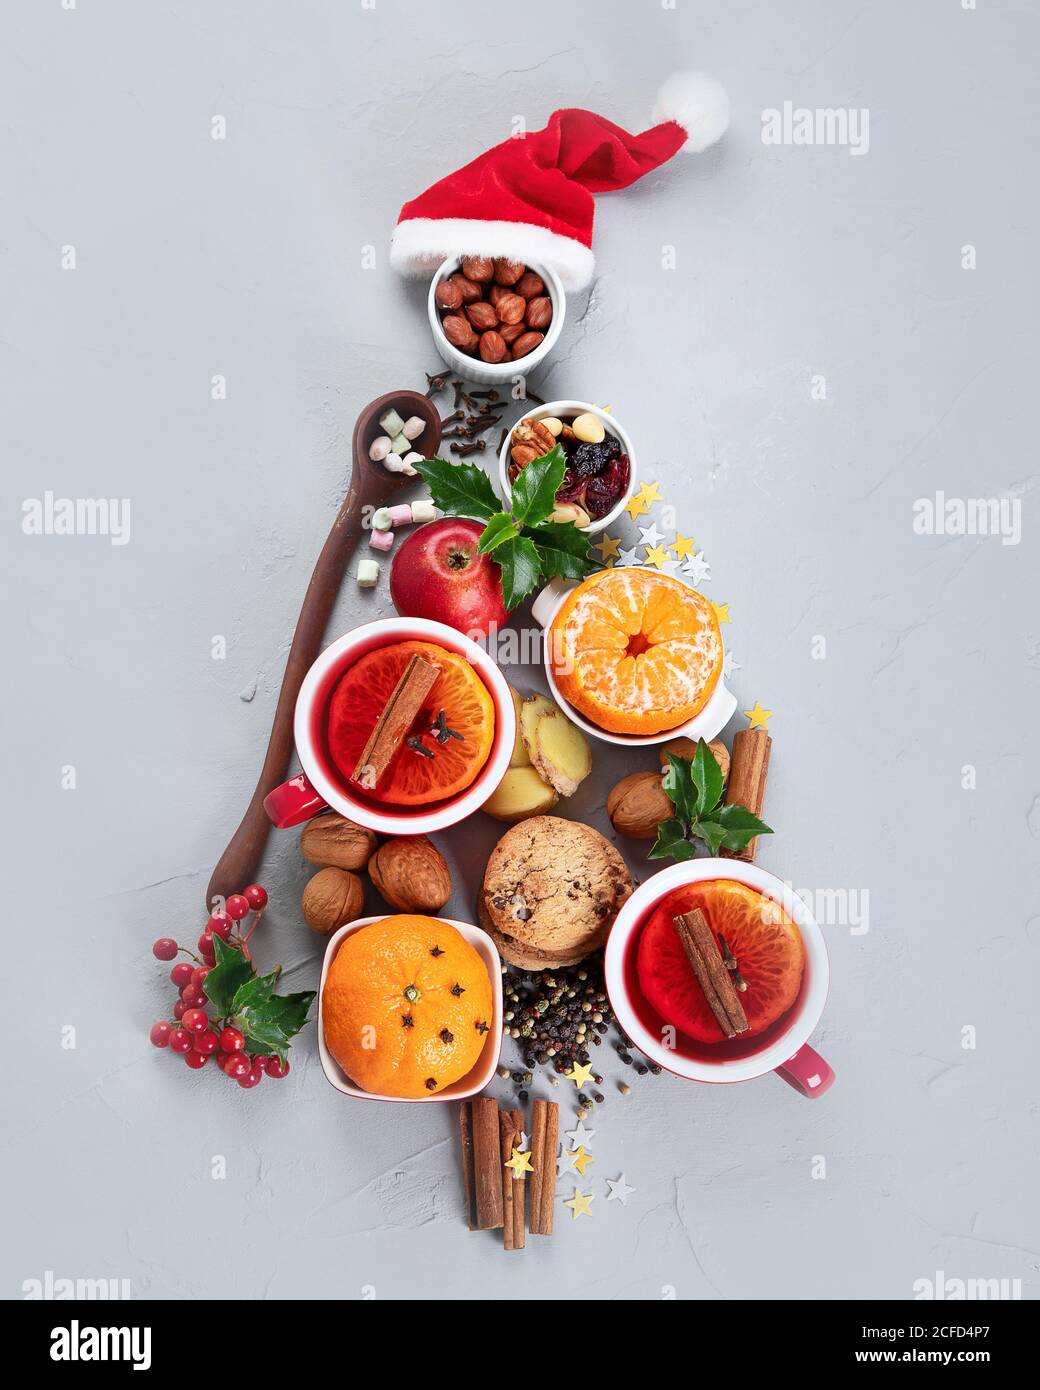 Christmas Tree made of holiday food on concrete background. Top view, flat lay. Christmas concept. New Year Holidays background. Stock Photo